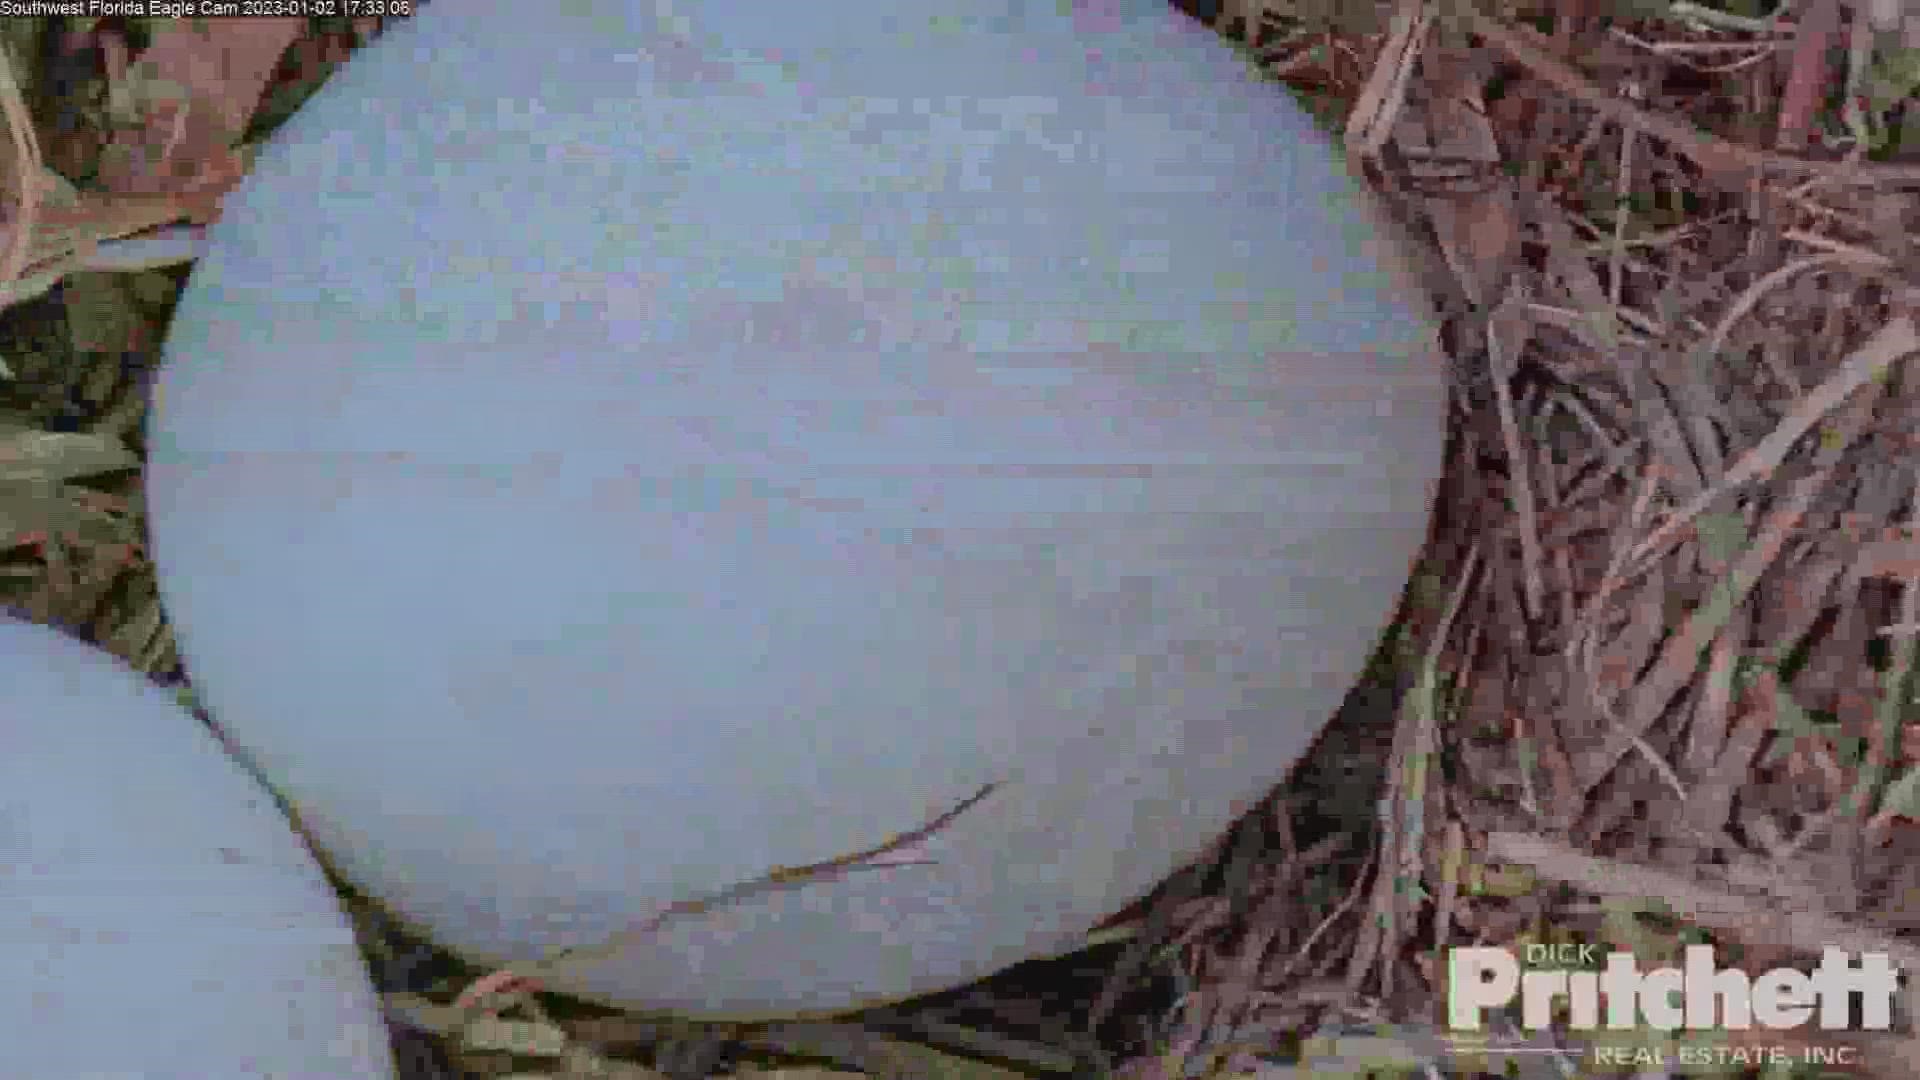 Harriet laid "Egg 1" on Nov. 29 while "Egg 2" was popped out on Dec. 2. Now, it's just a waiting game.